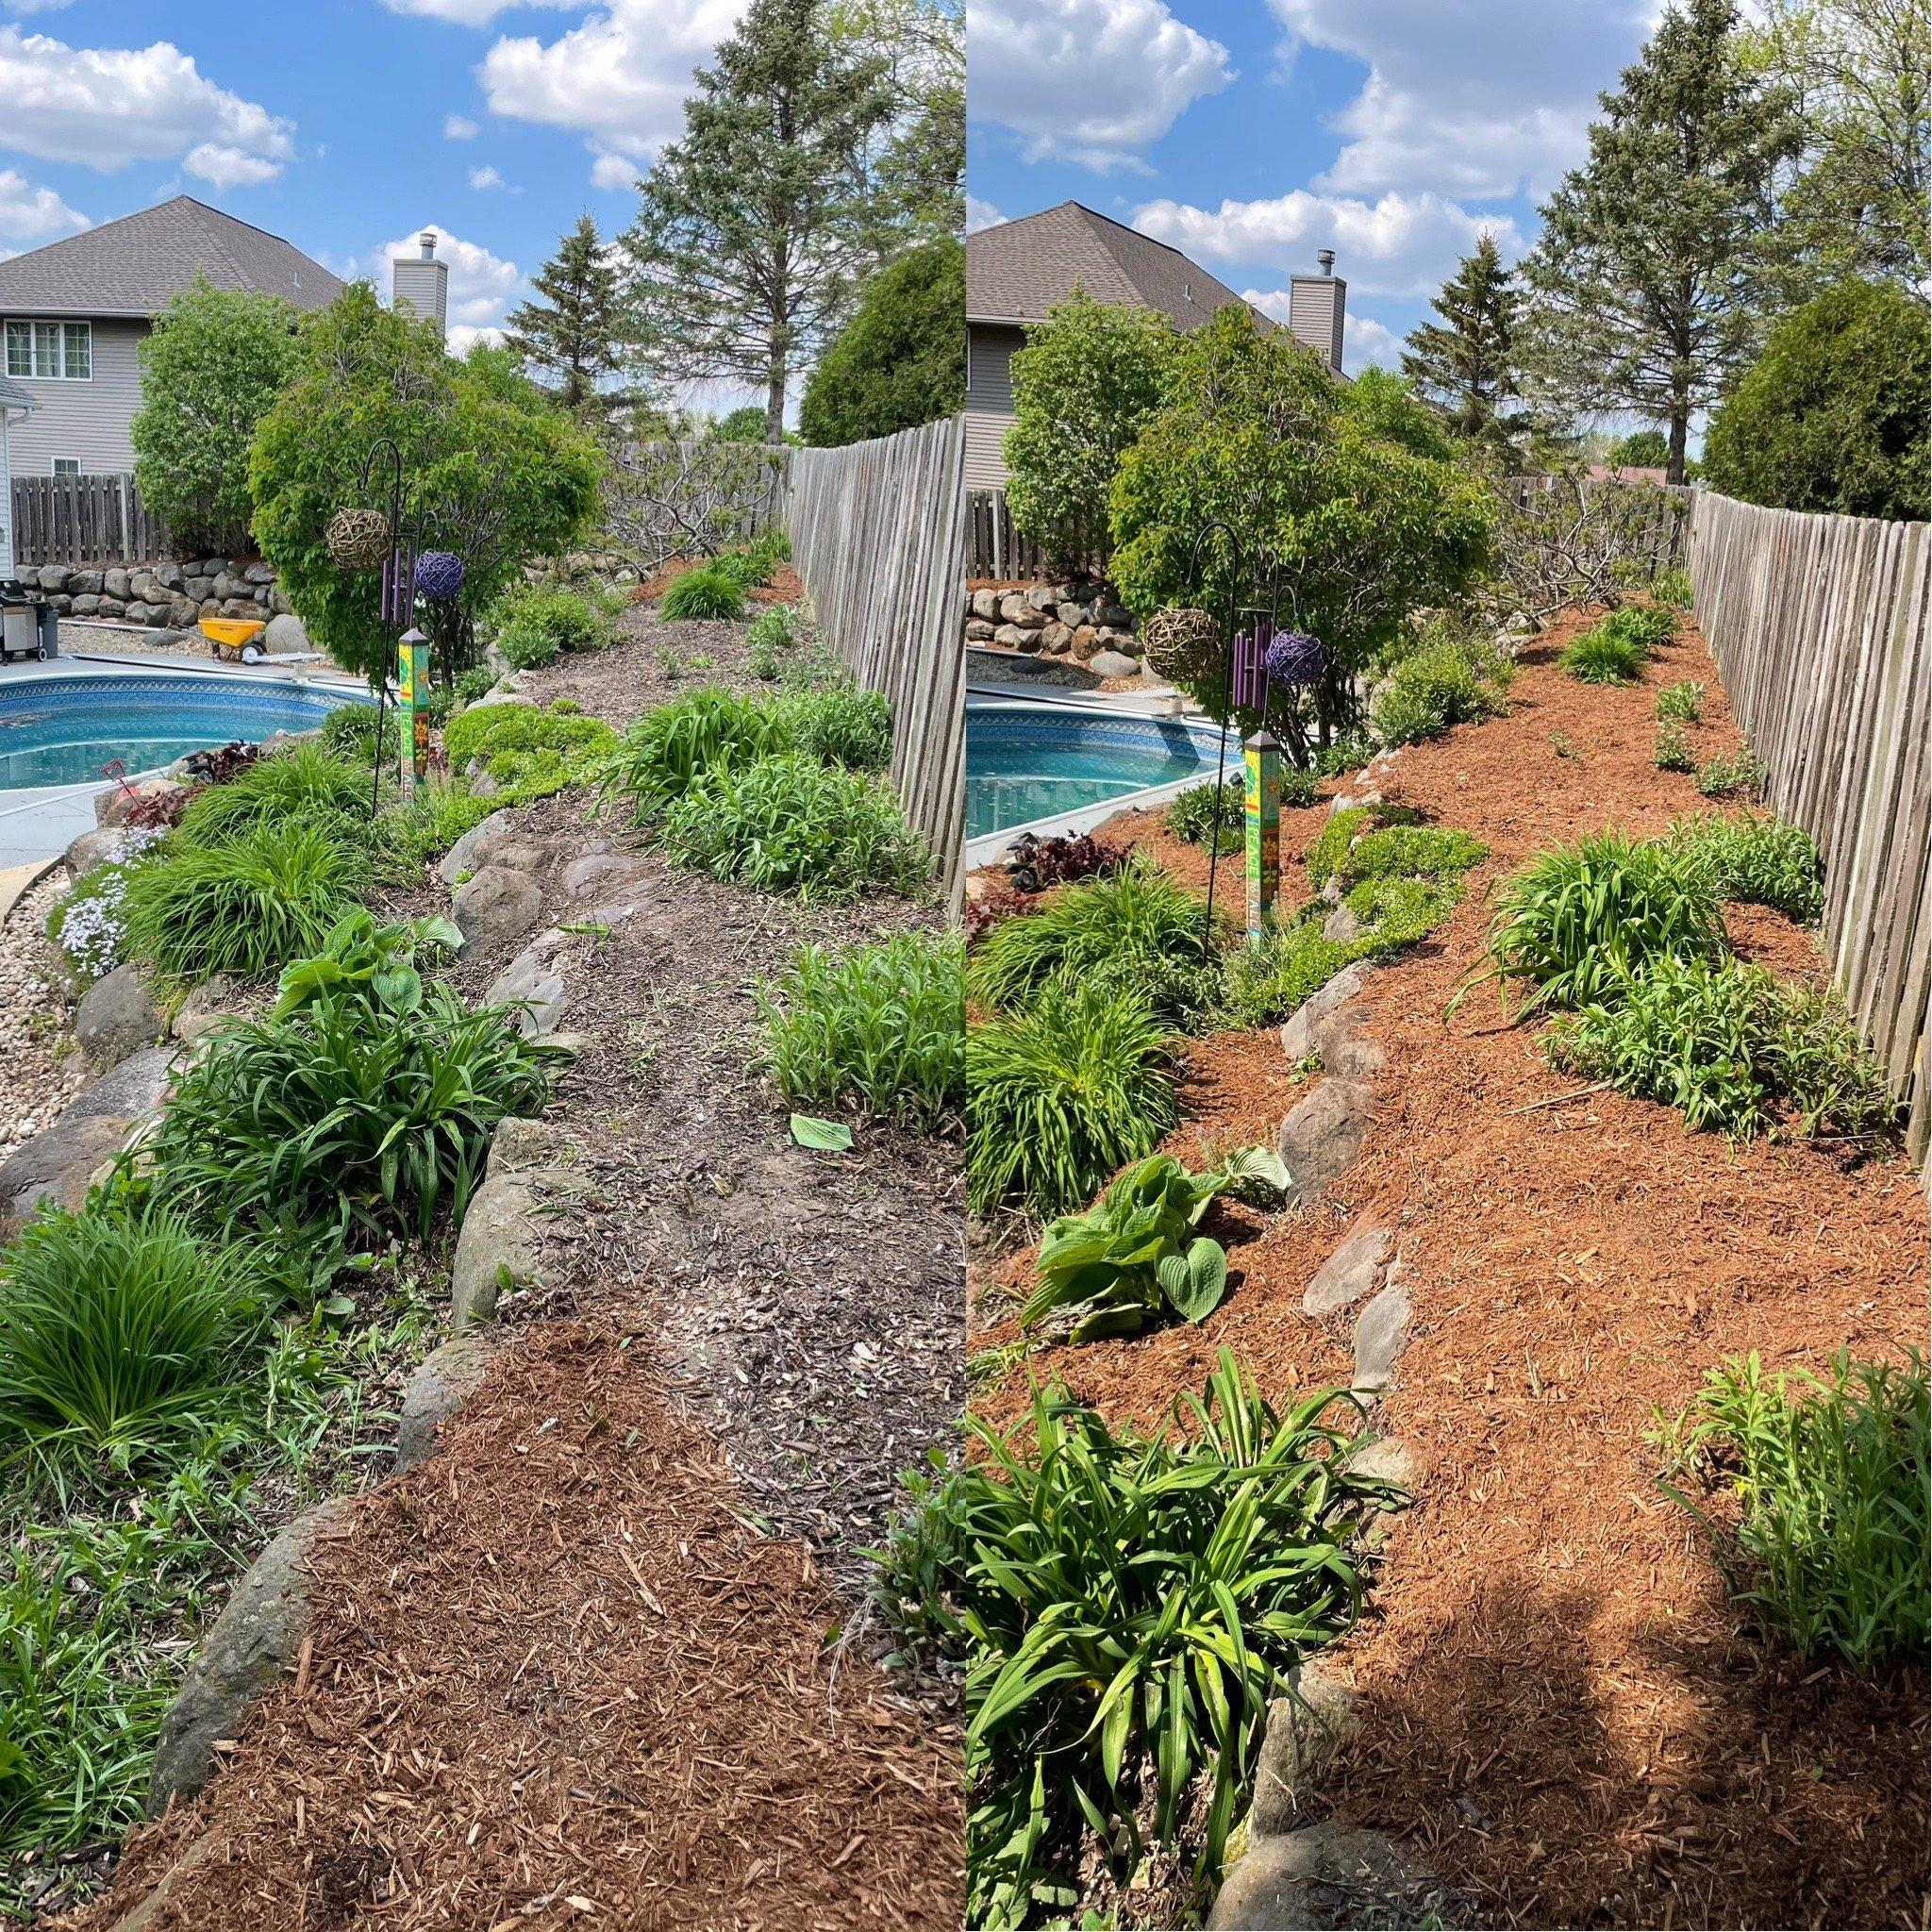 Professional Landscaping Services by Argent Solutions: Crafted to Enhance Your Outdoor Space